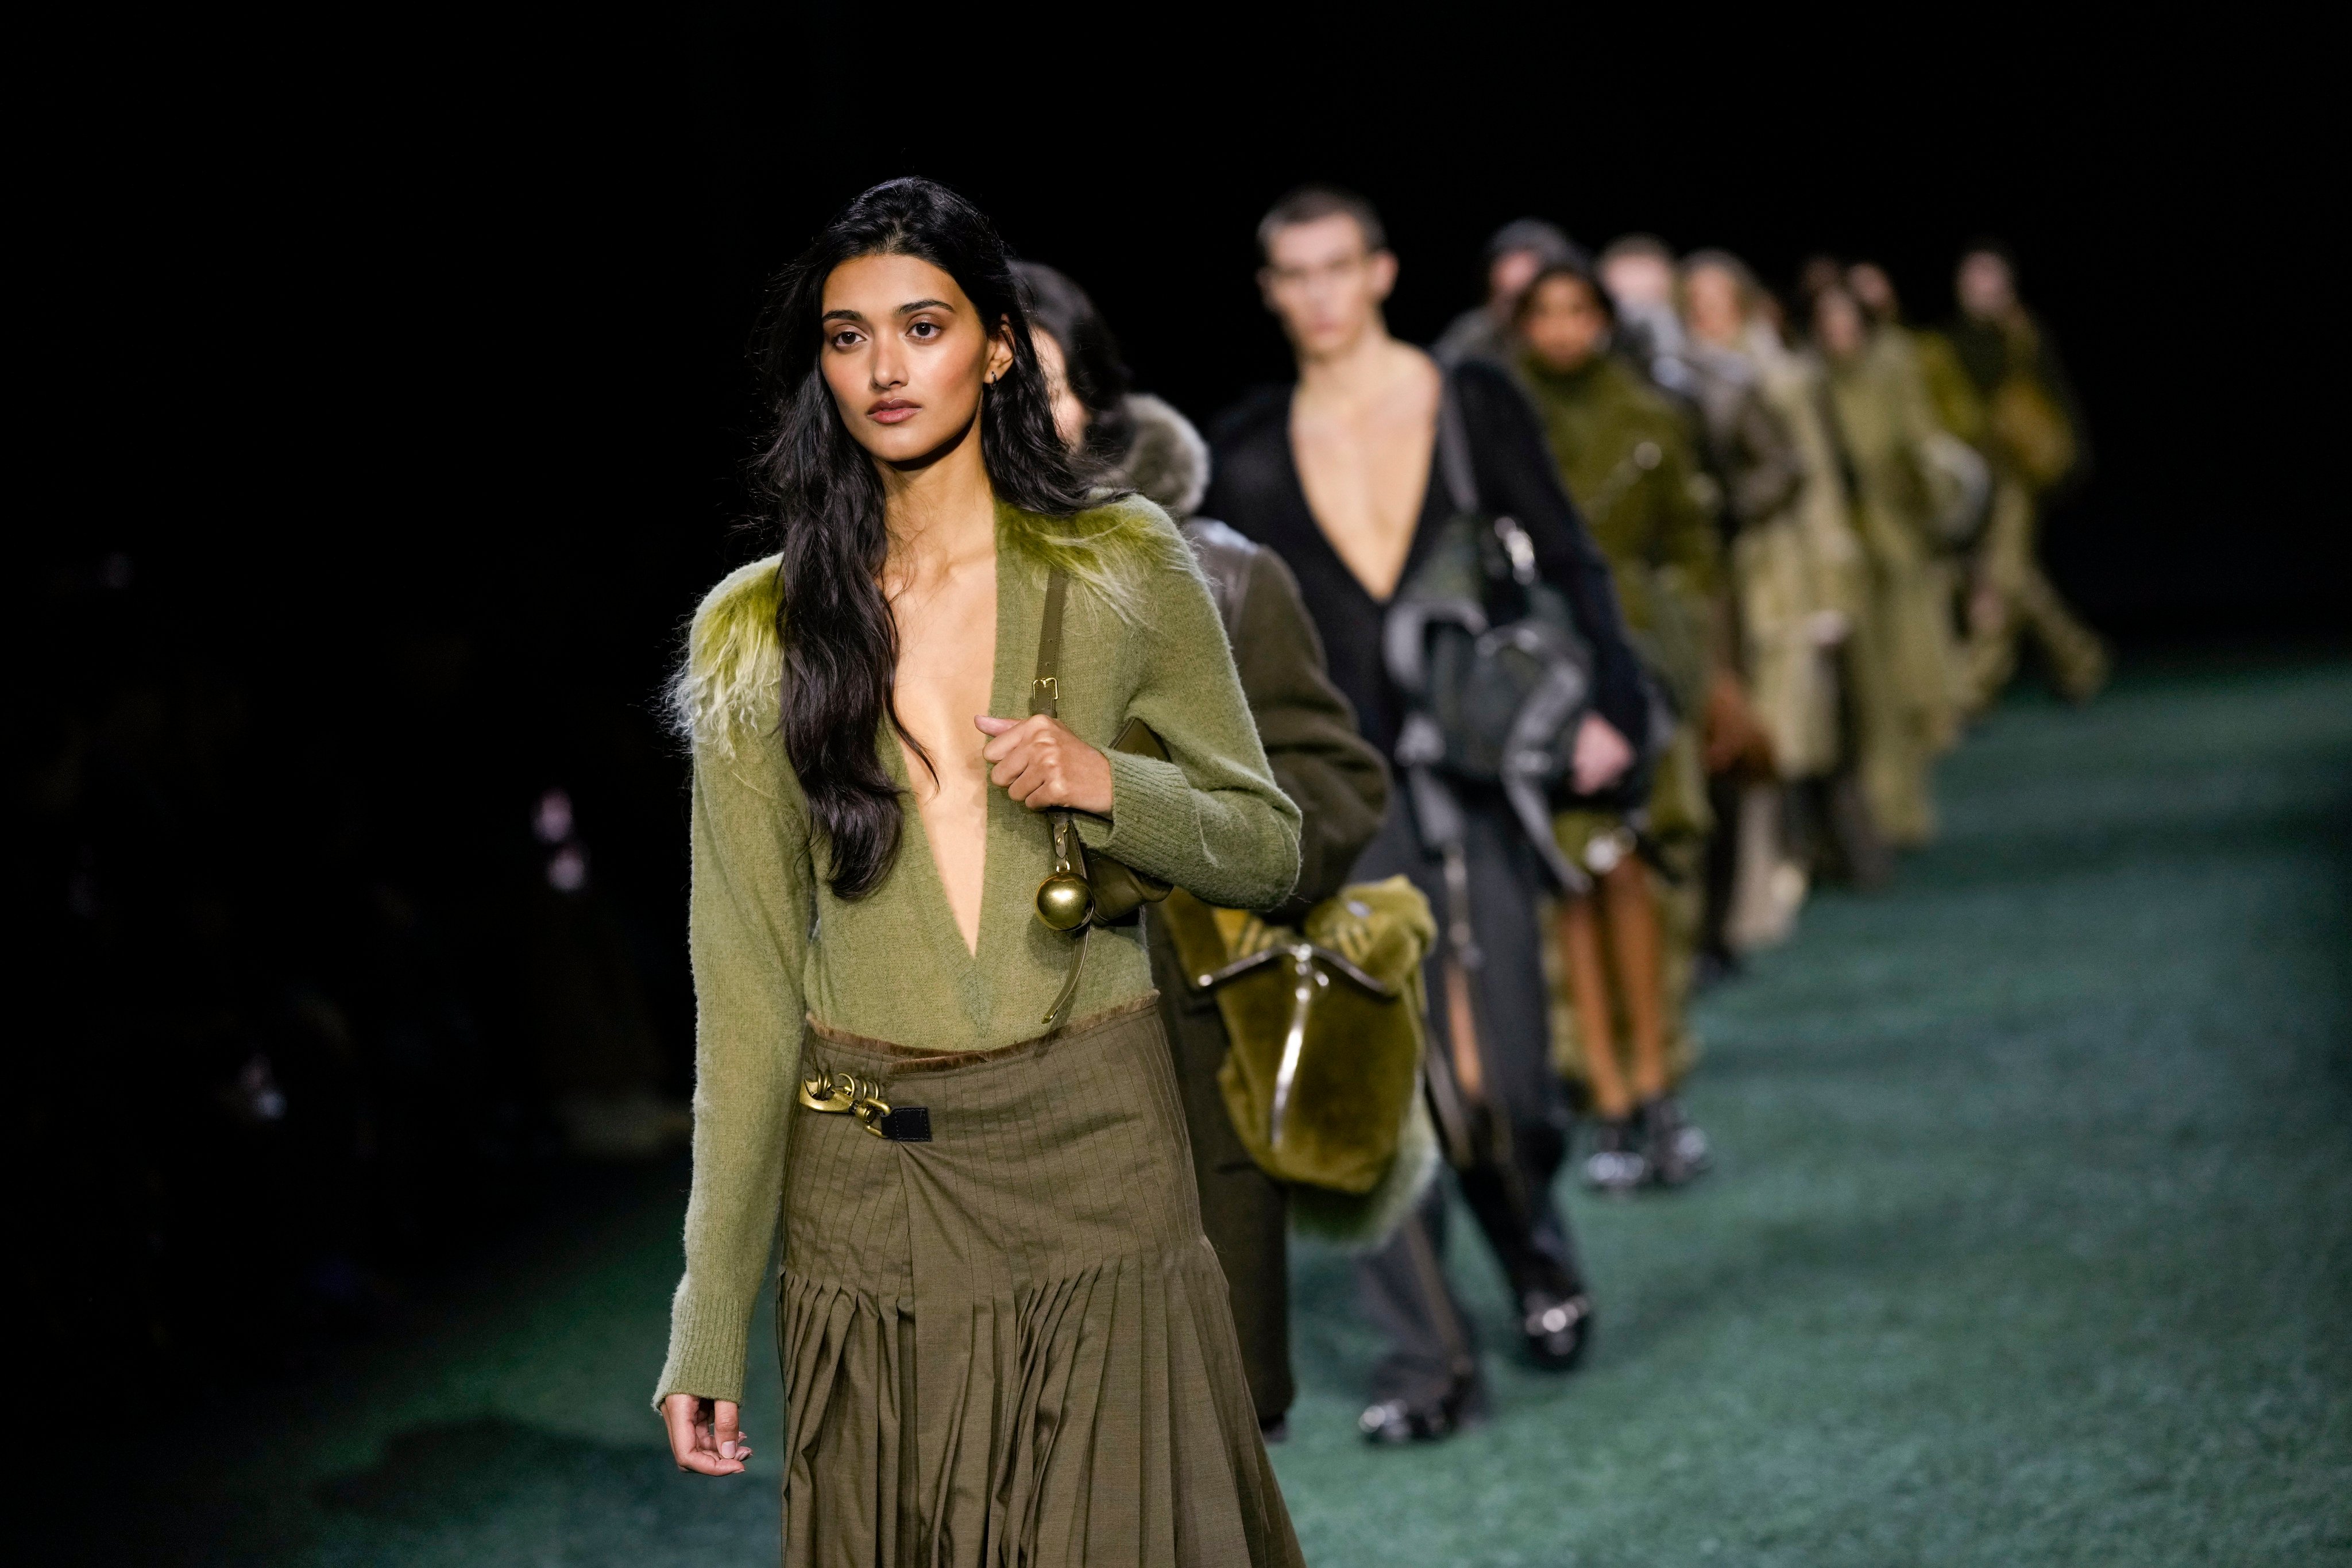 Burberry: Latest News and Updates